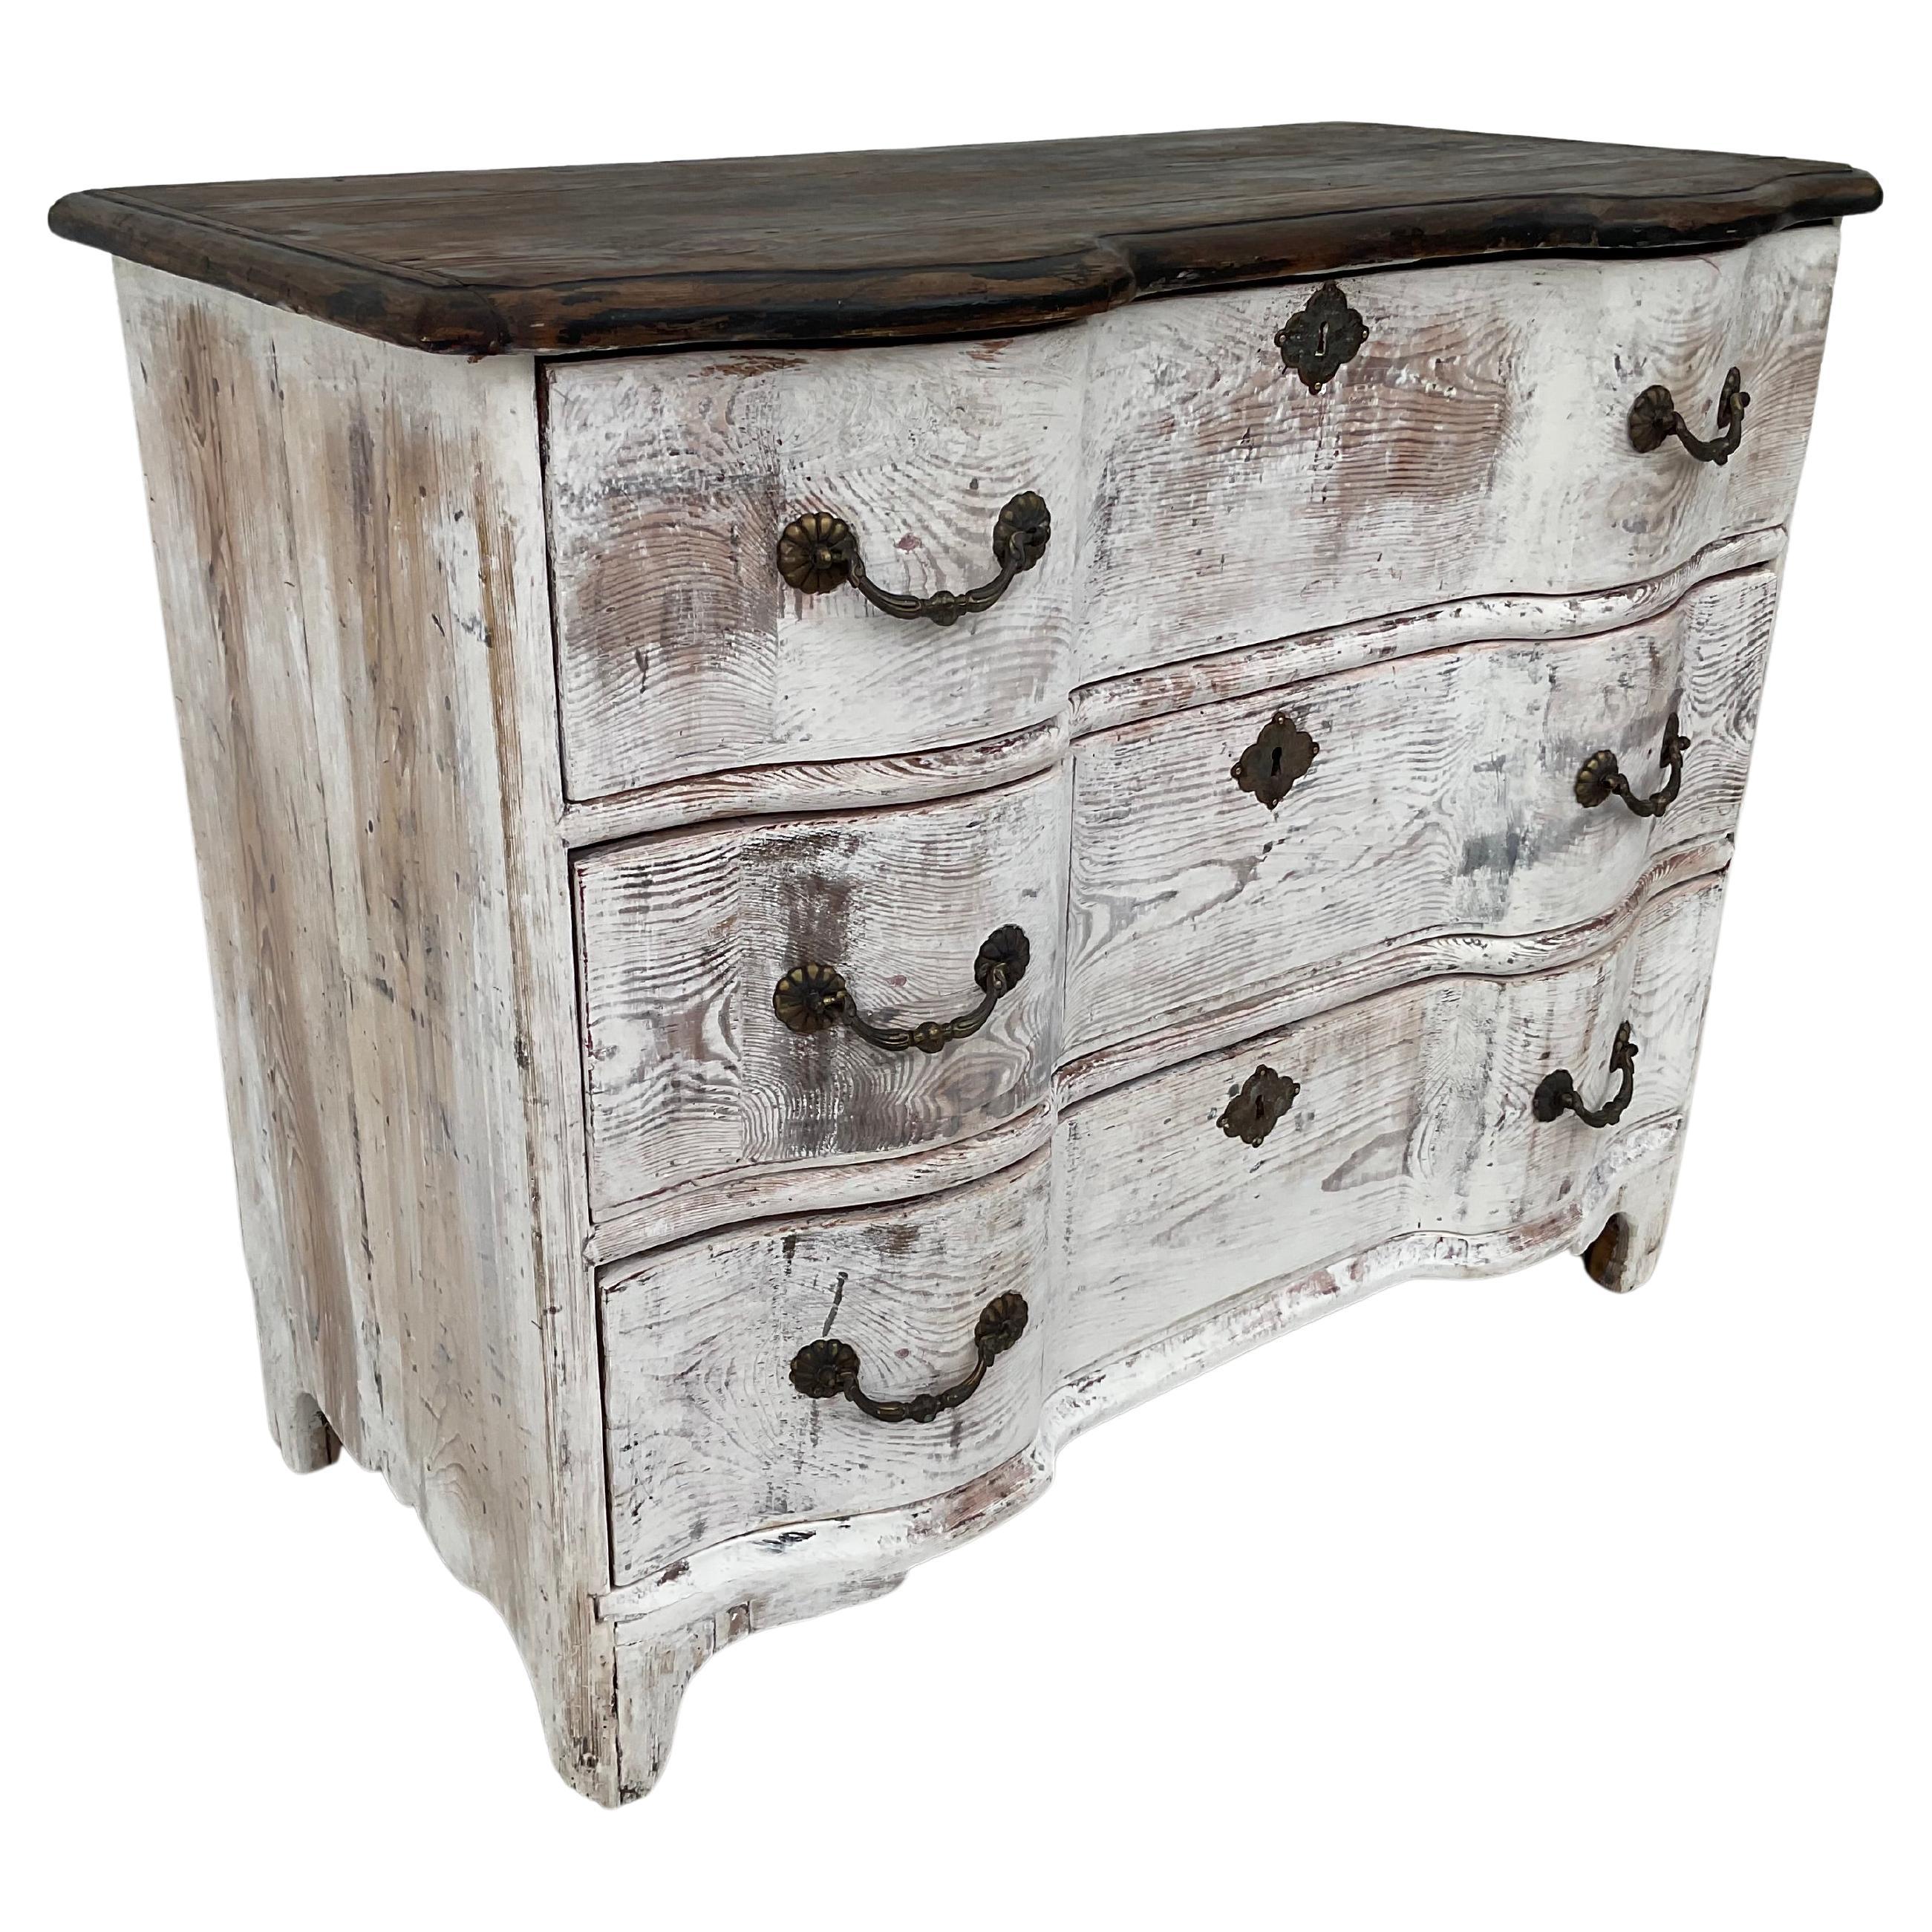 18th Century Dutch Rococo Period Serpentine Front Painted Commode For Sale